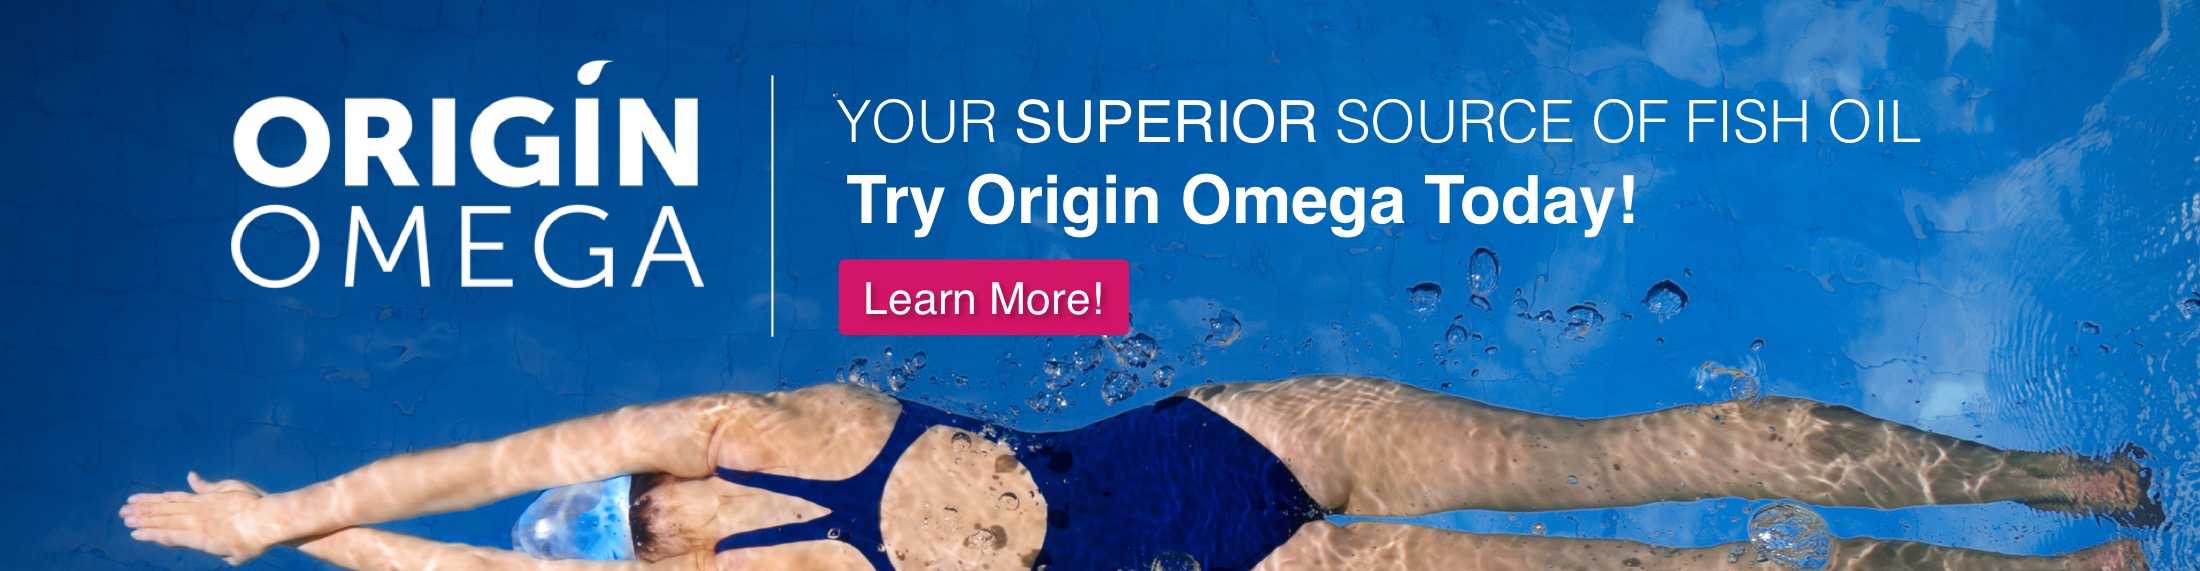 Your superior source of fish oil. Try Origin Omega Today!